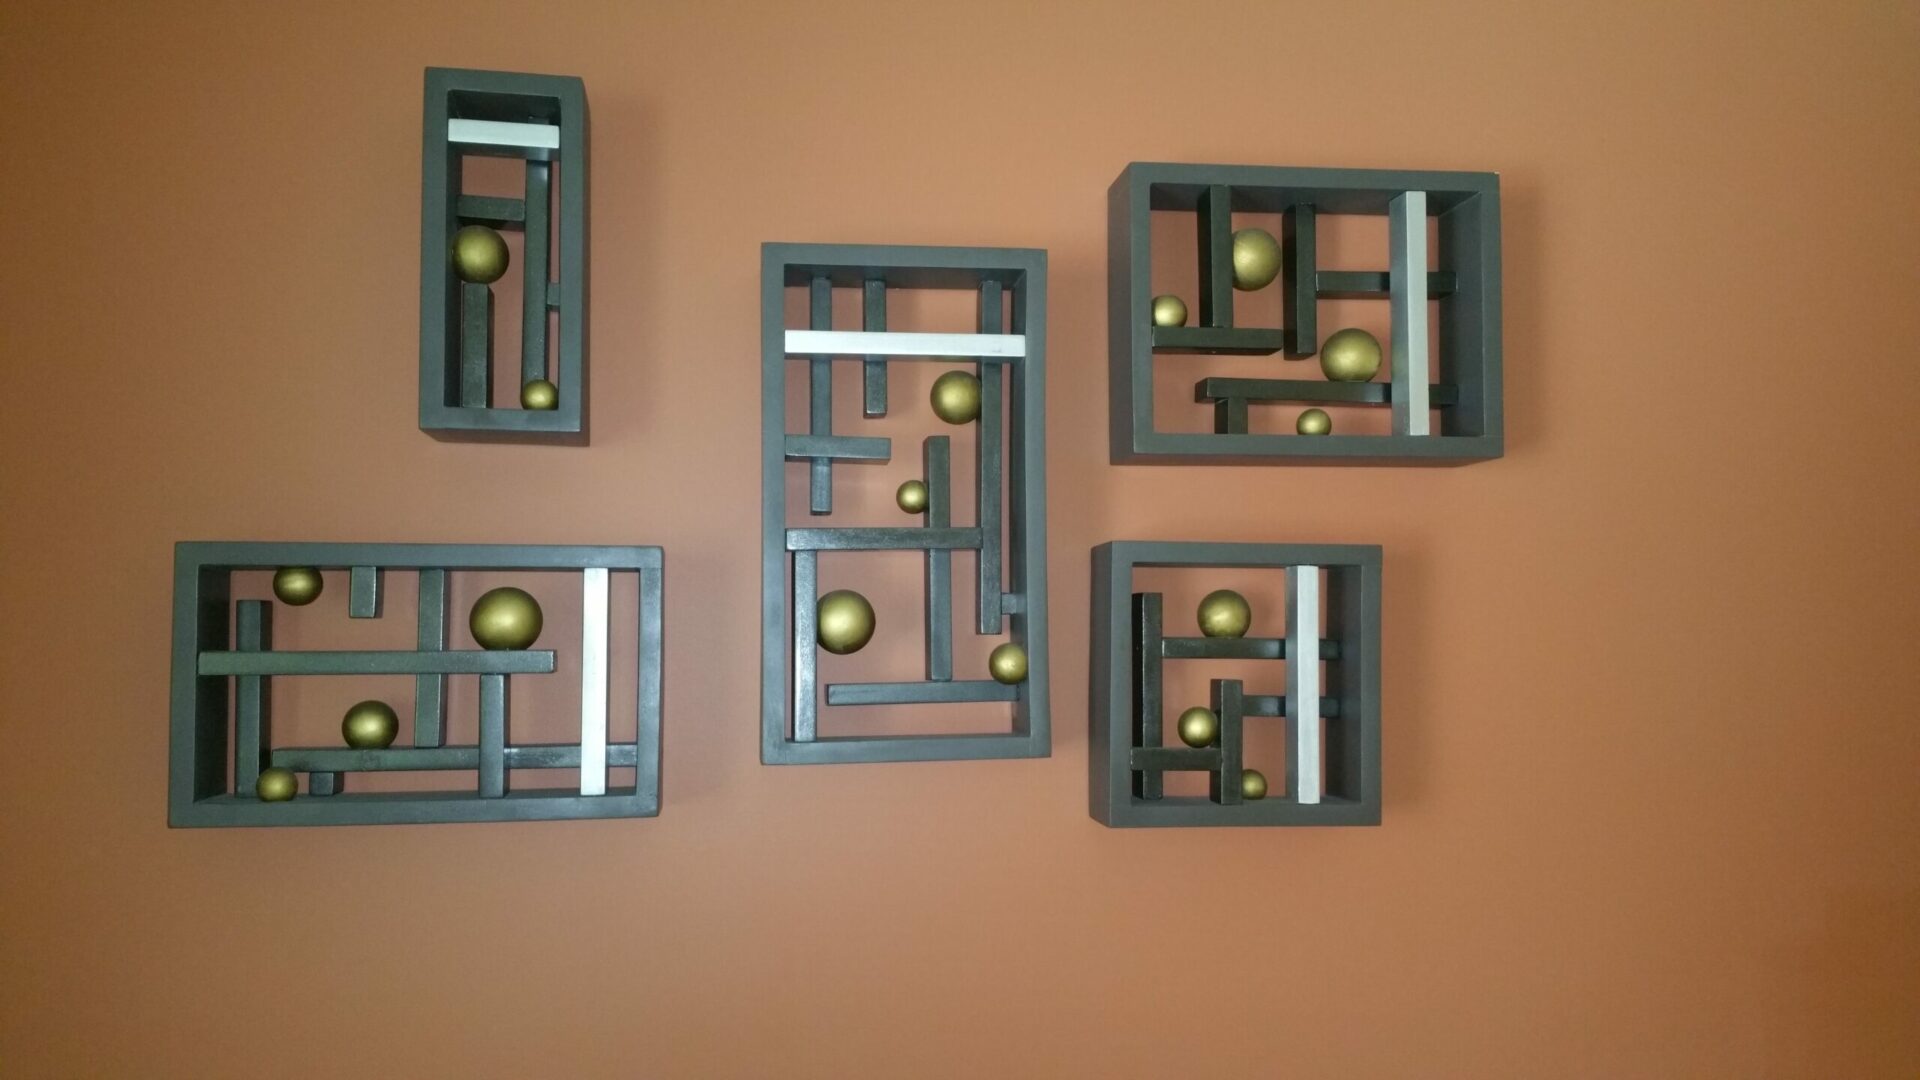 A wall with some wooden blocks and balls on it